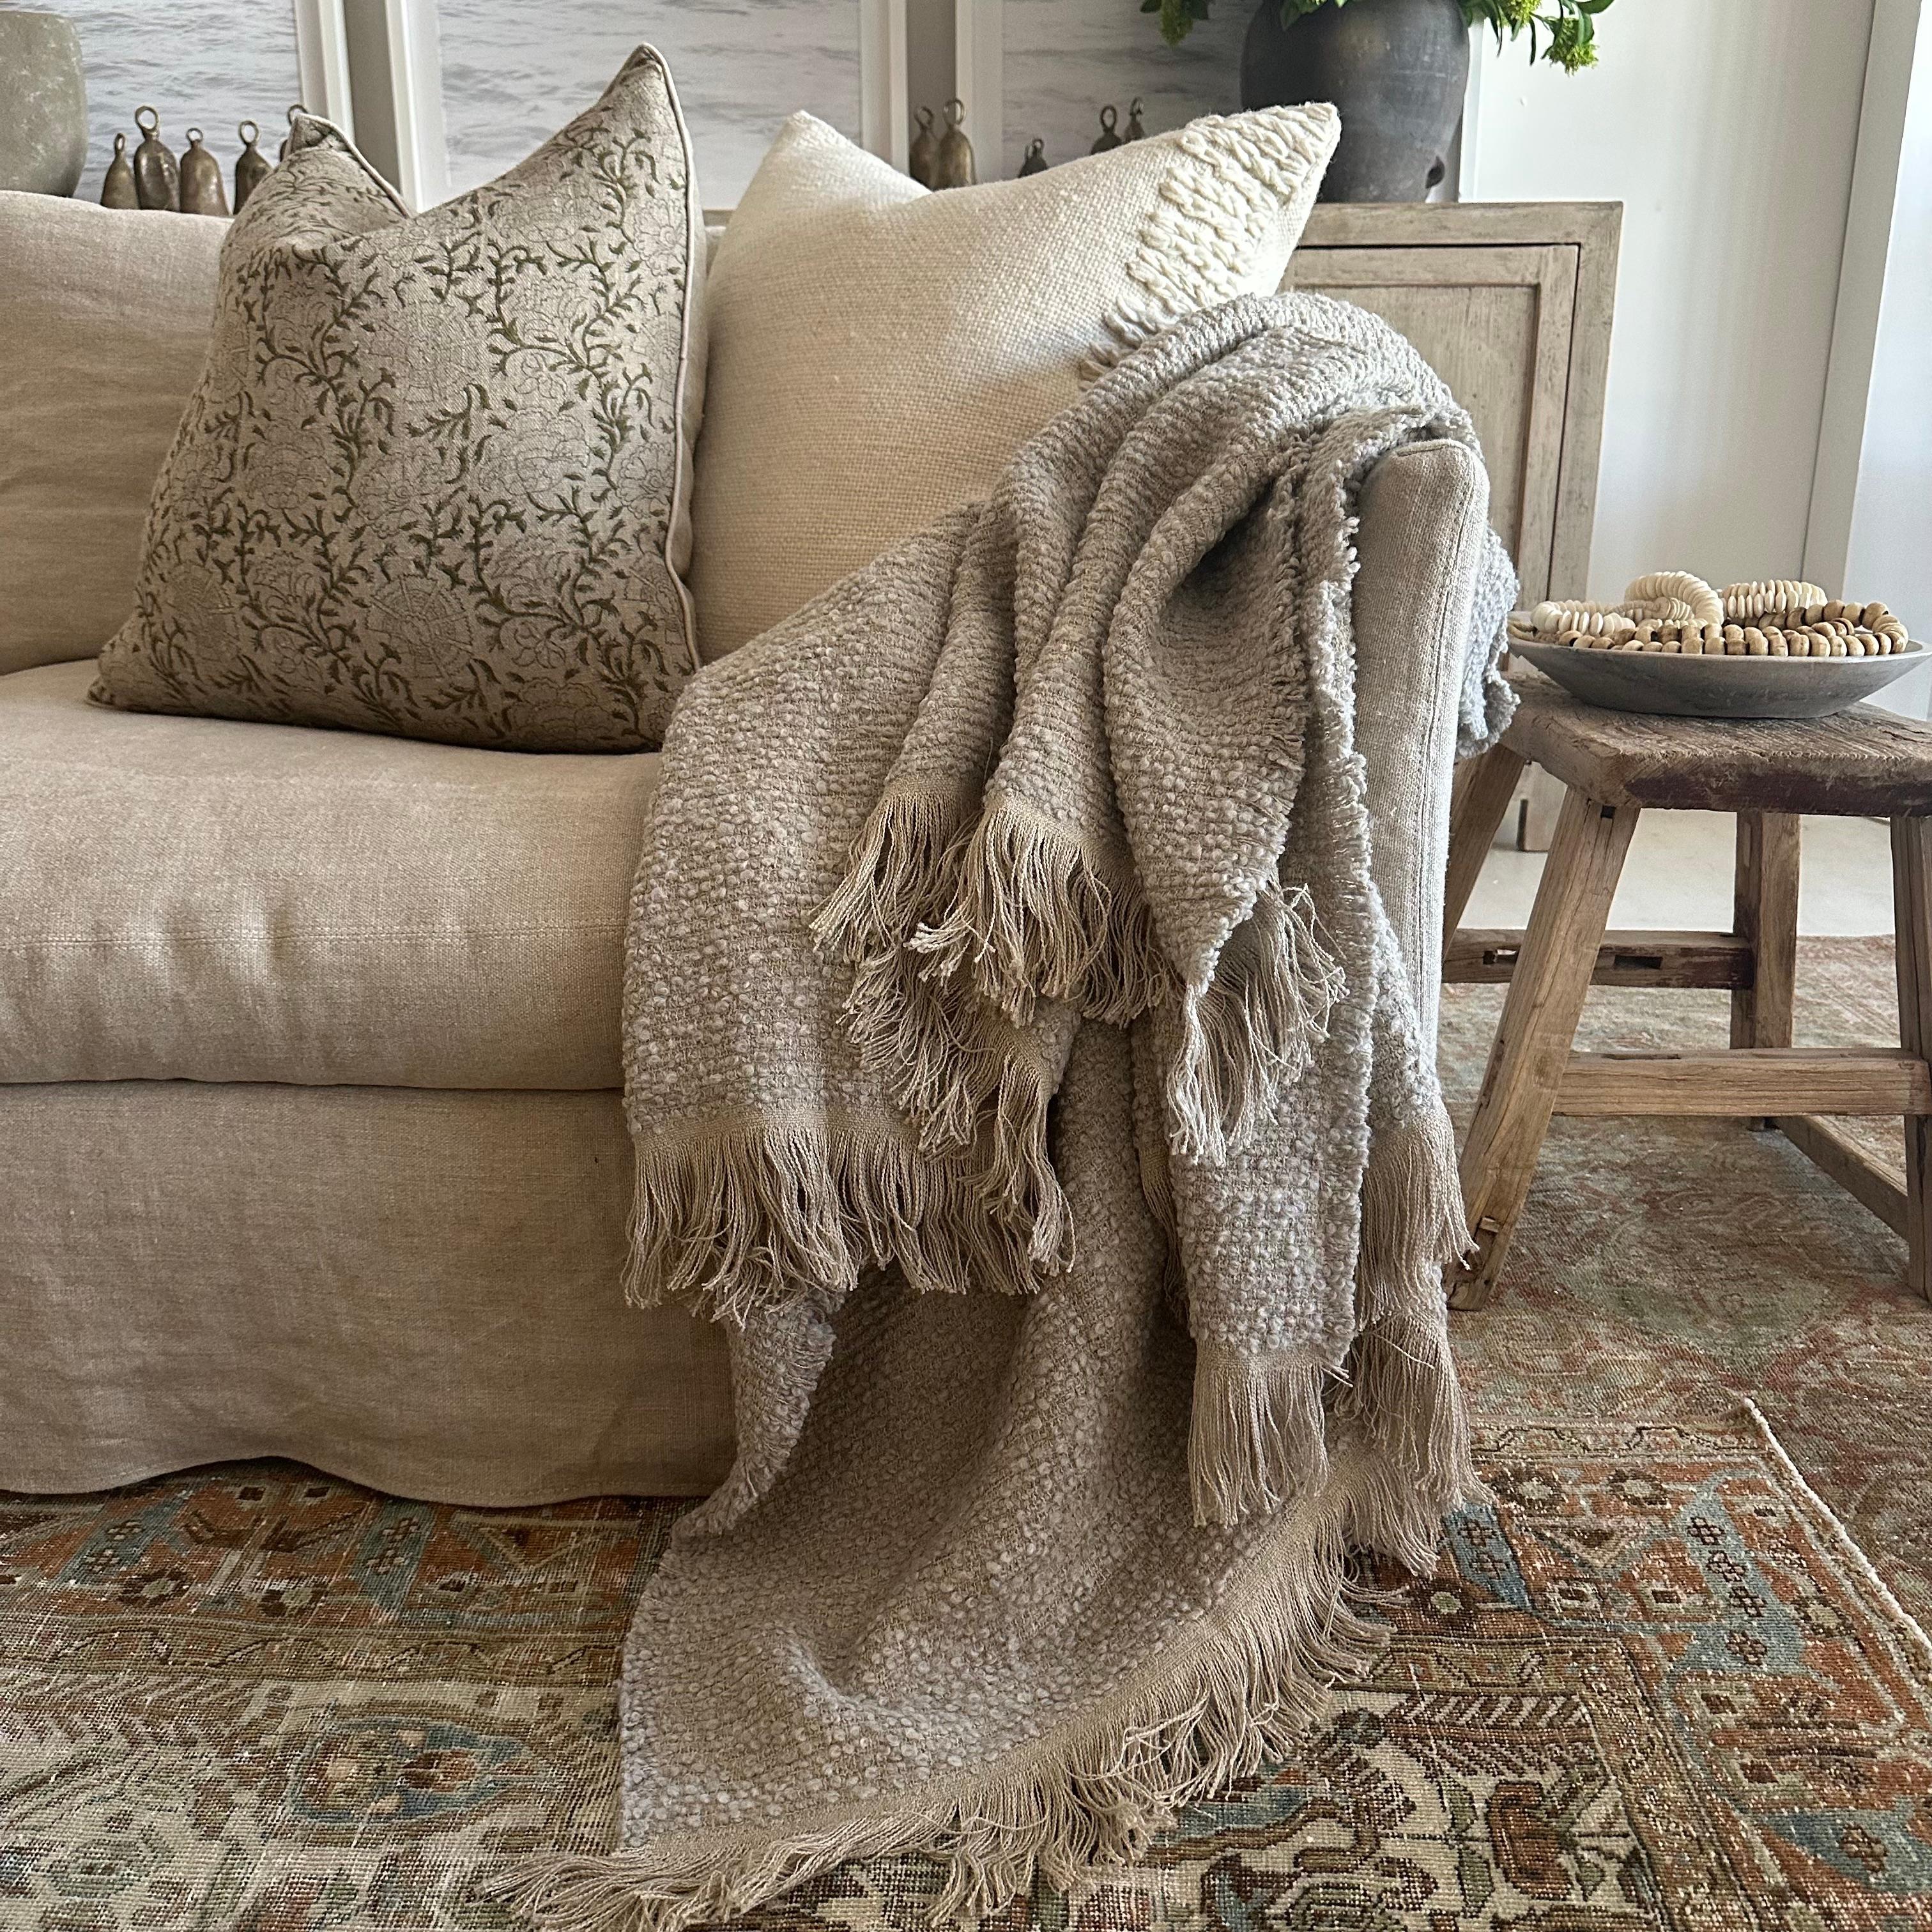 Woven in Belgium using traditional weaving techniques, Bloom Home Inc throw features a combination of smooth Belgian linen warp and an alternating Belgian linen and Alpaca wool weft. The boucle Alpaca weft creates a stunning texture that contrast